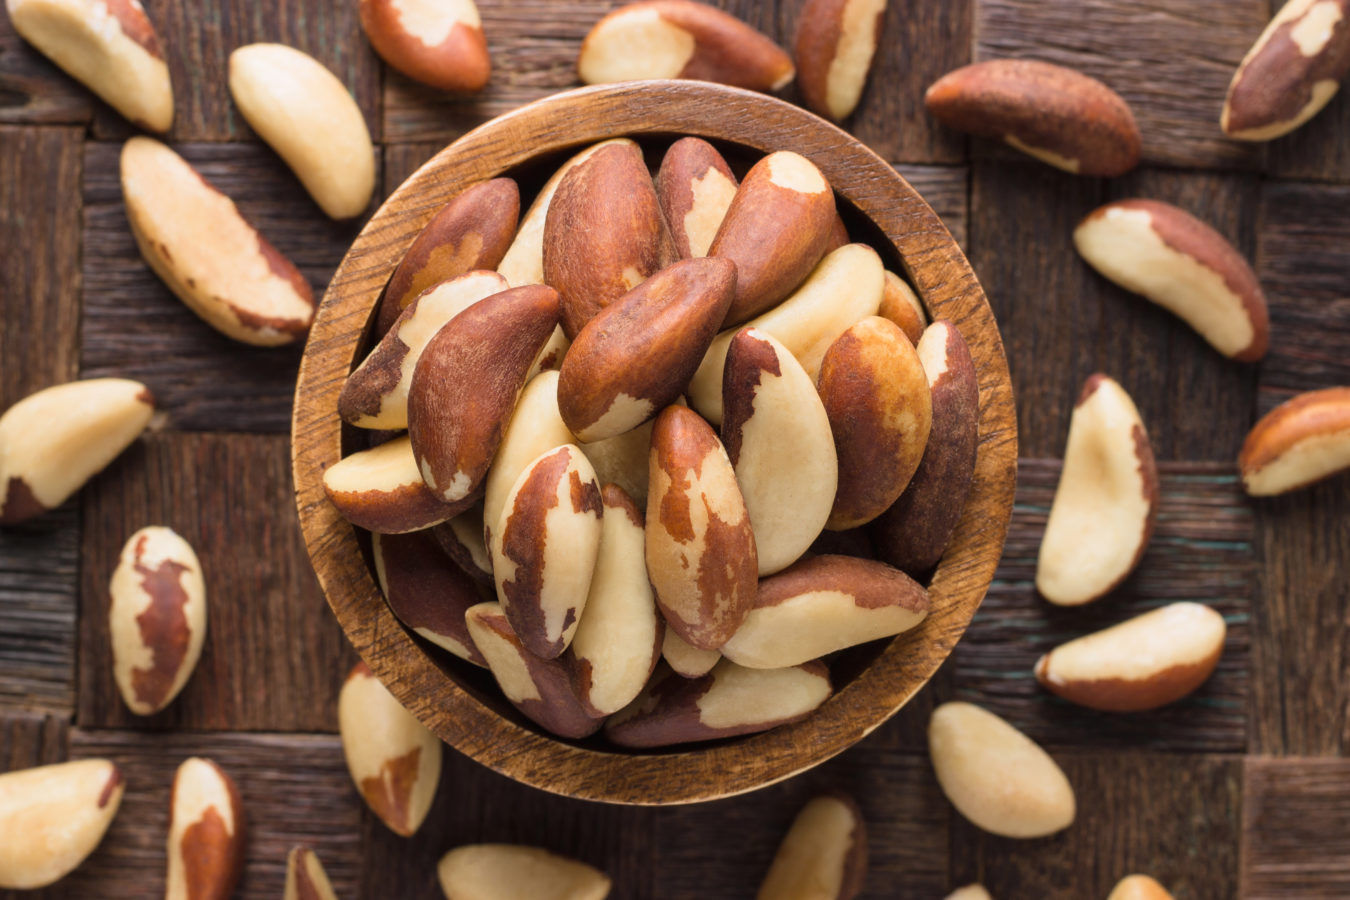 5 health benefits of Brazil nuts, the superfood you need in your diet today